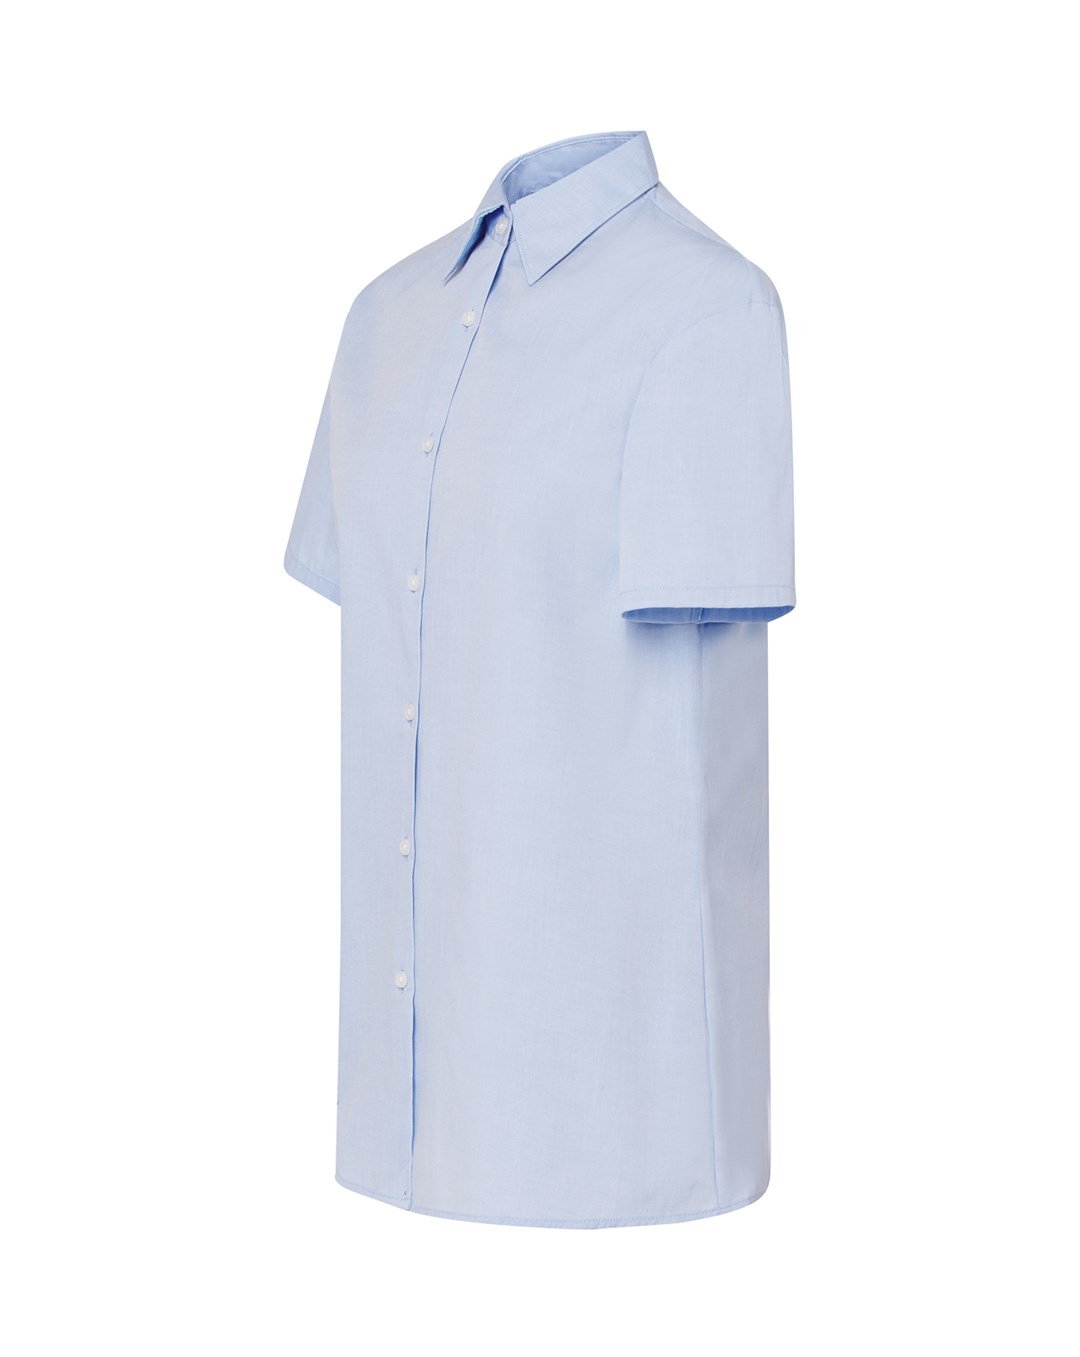 Formal shirt for women with short sleeves